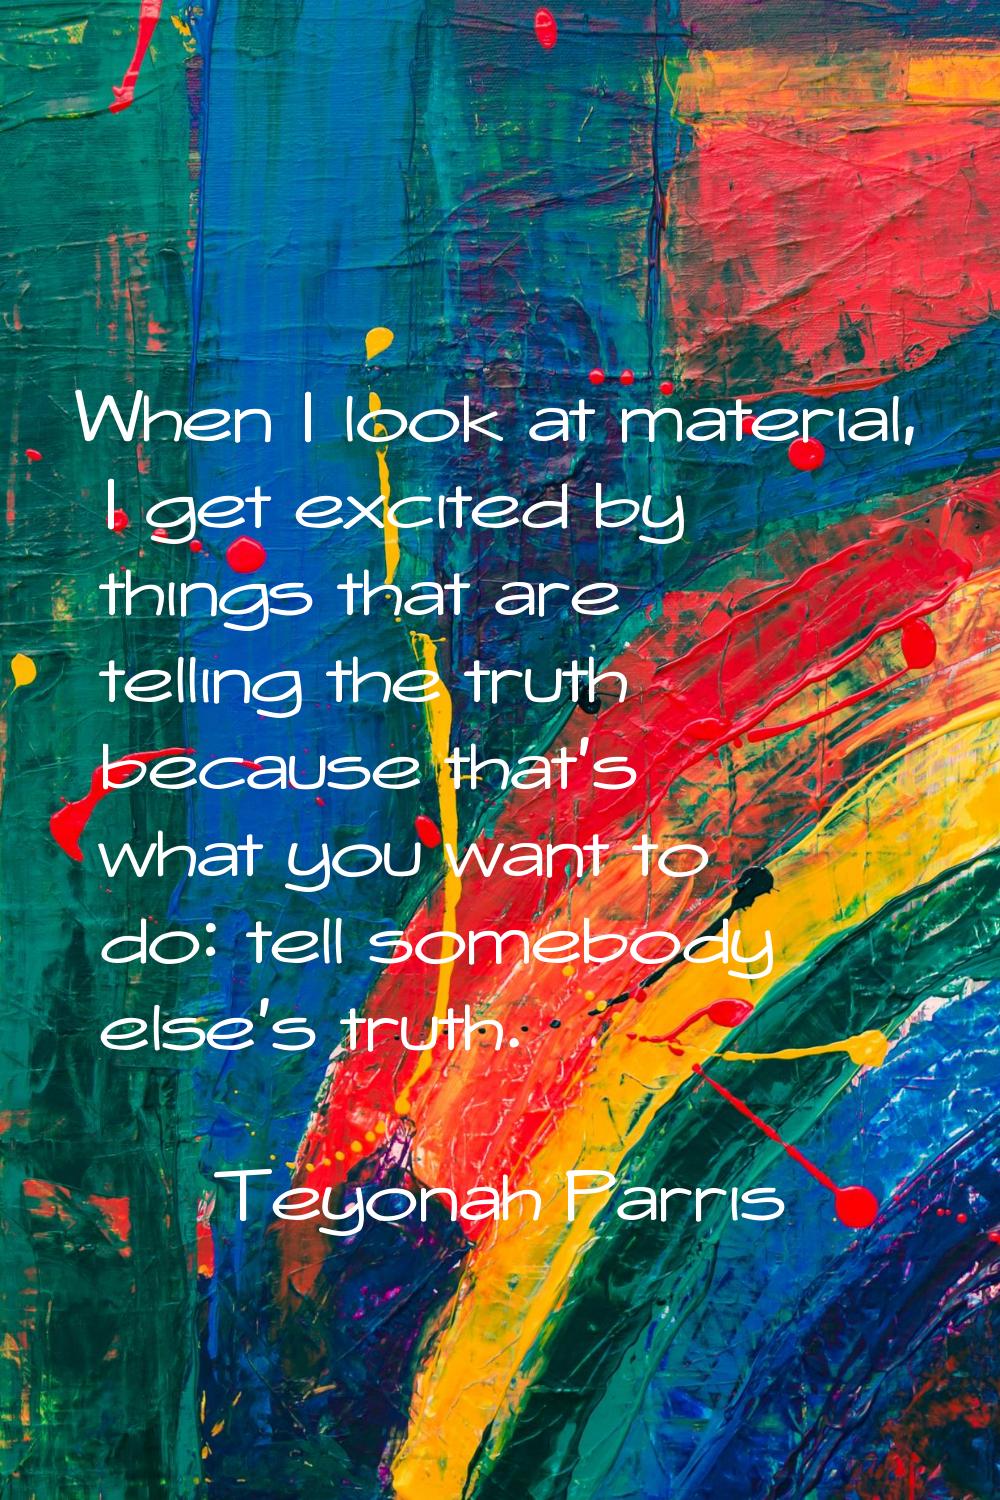 When I look at material, I get excited by things that are telling the truth because that's what you